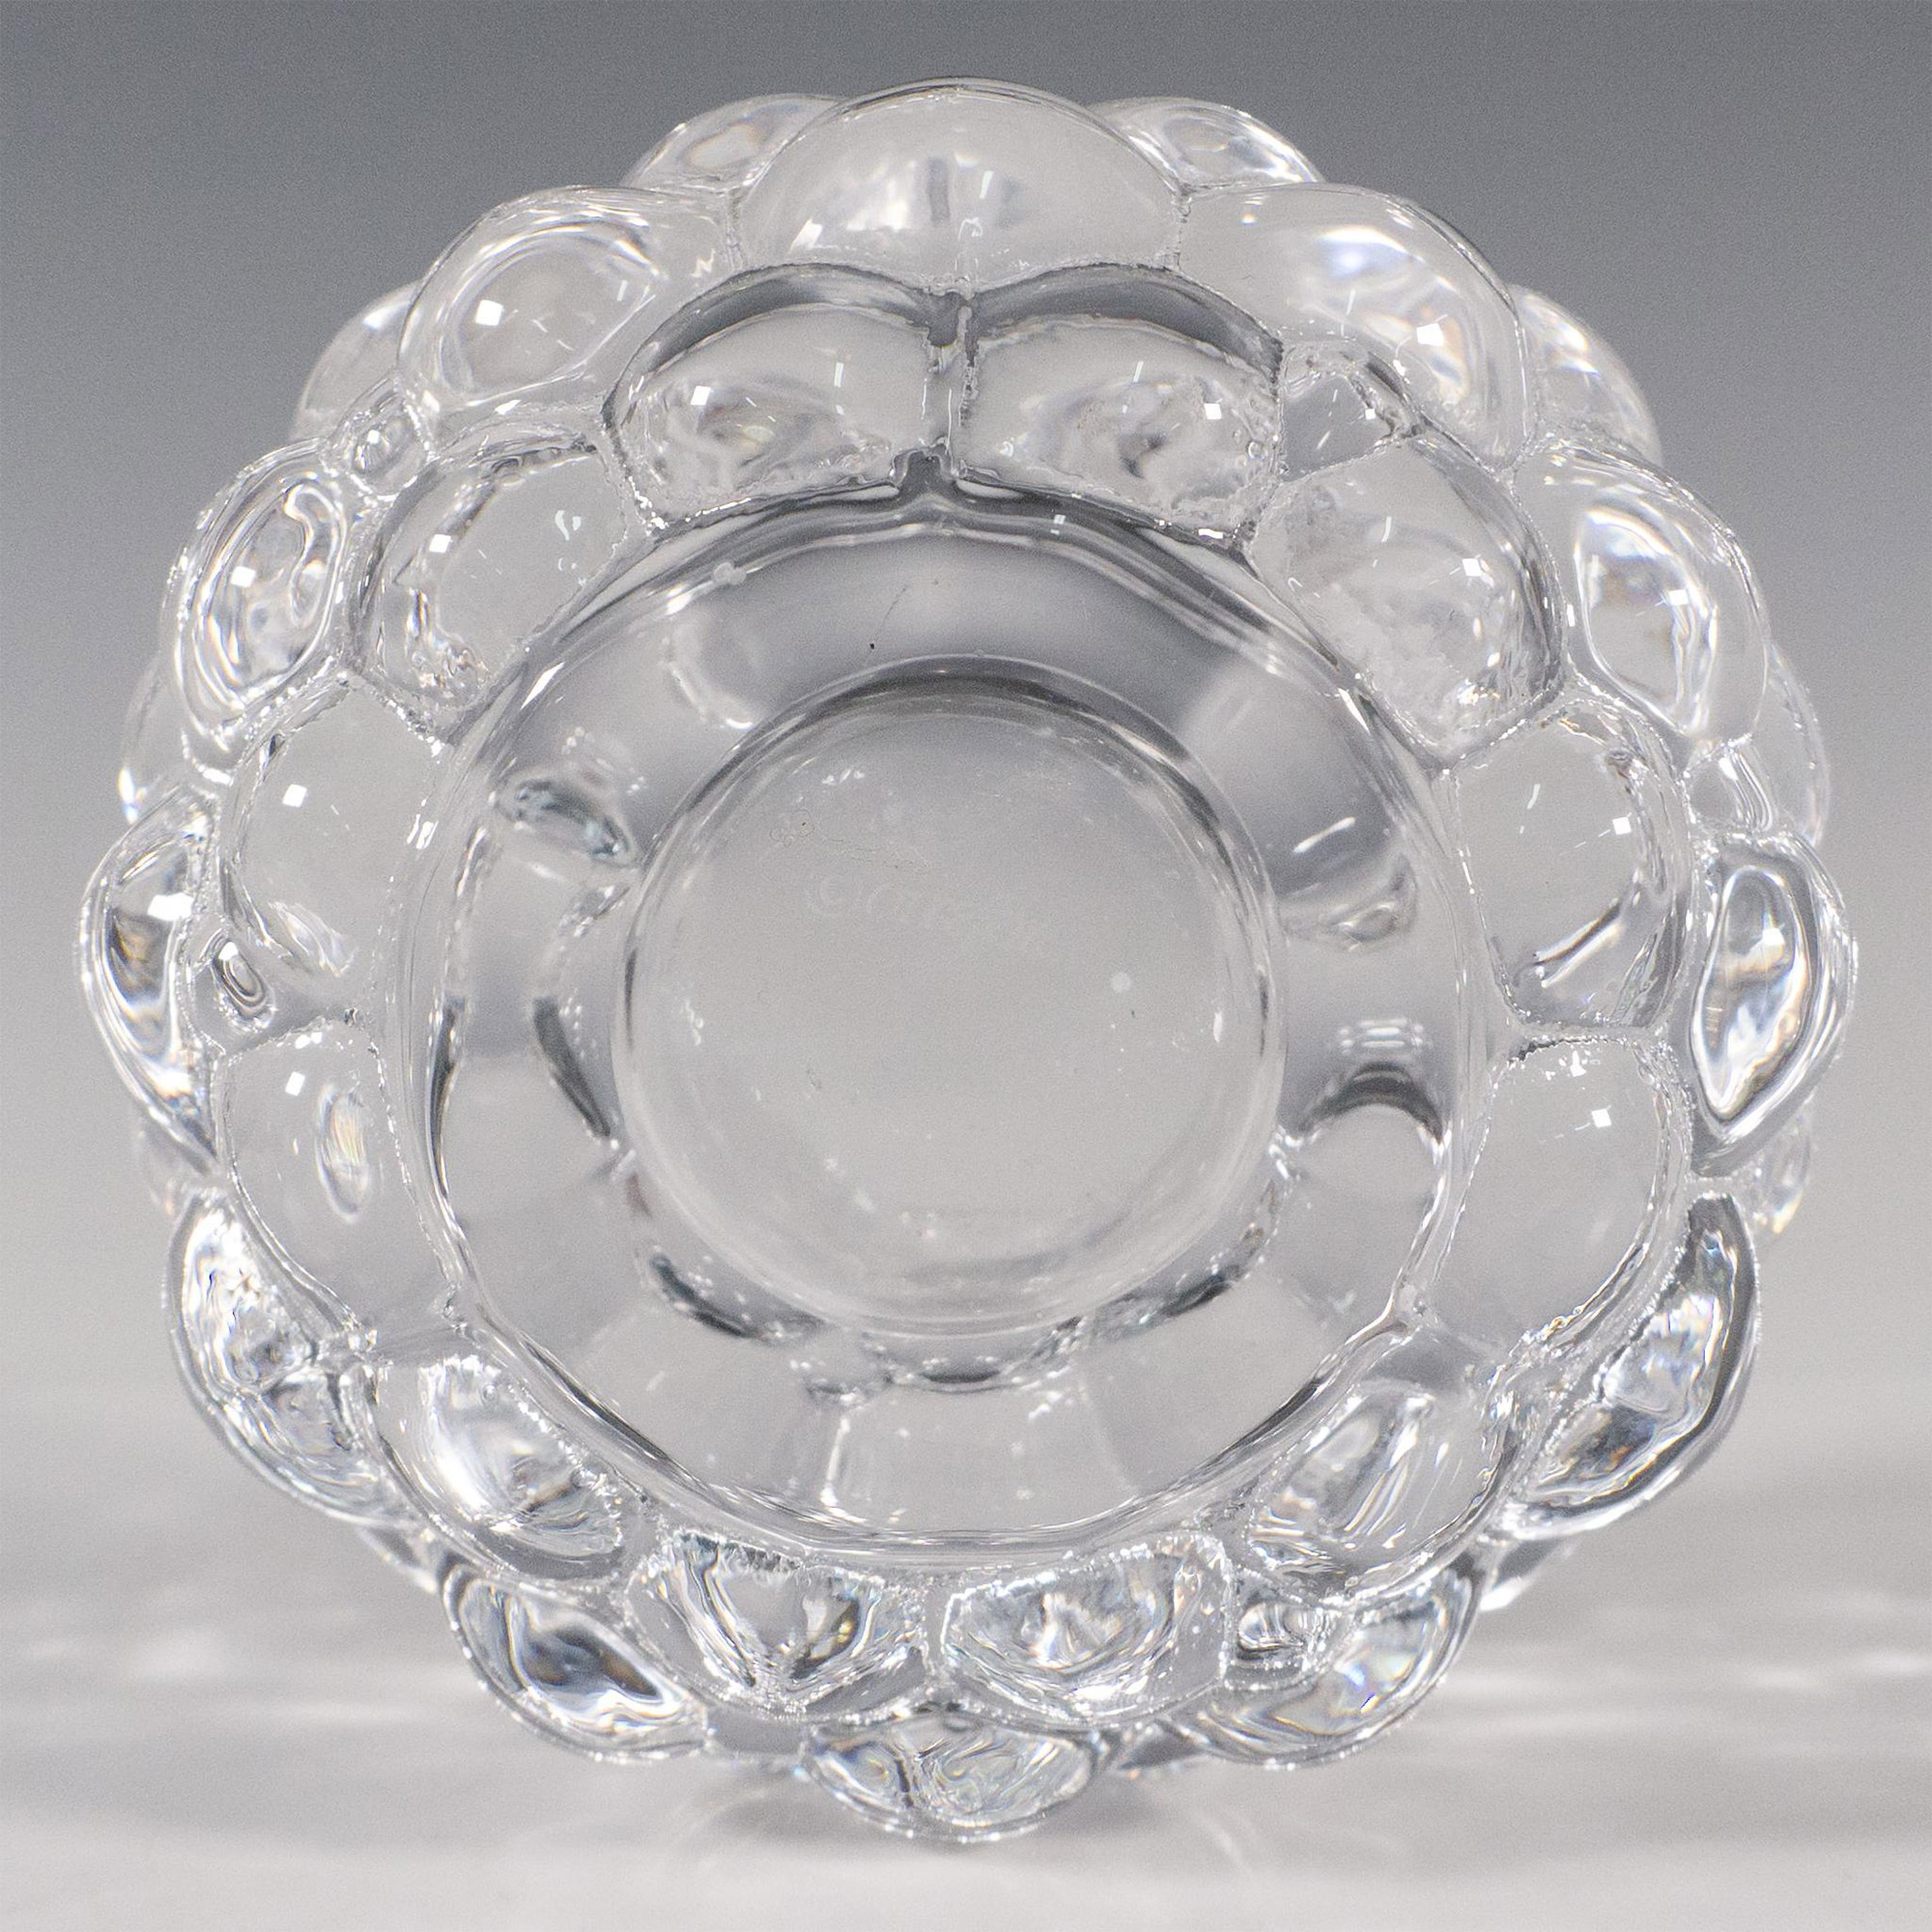 Orrefors by Anne Nilsson Crystal Candle Holder, Raspberry - Image 3 of 3